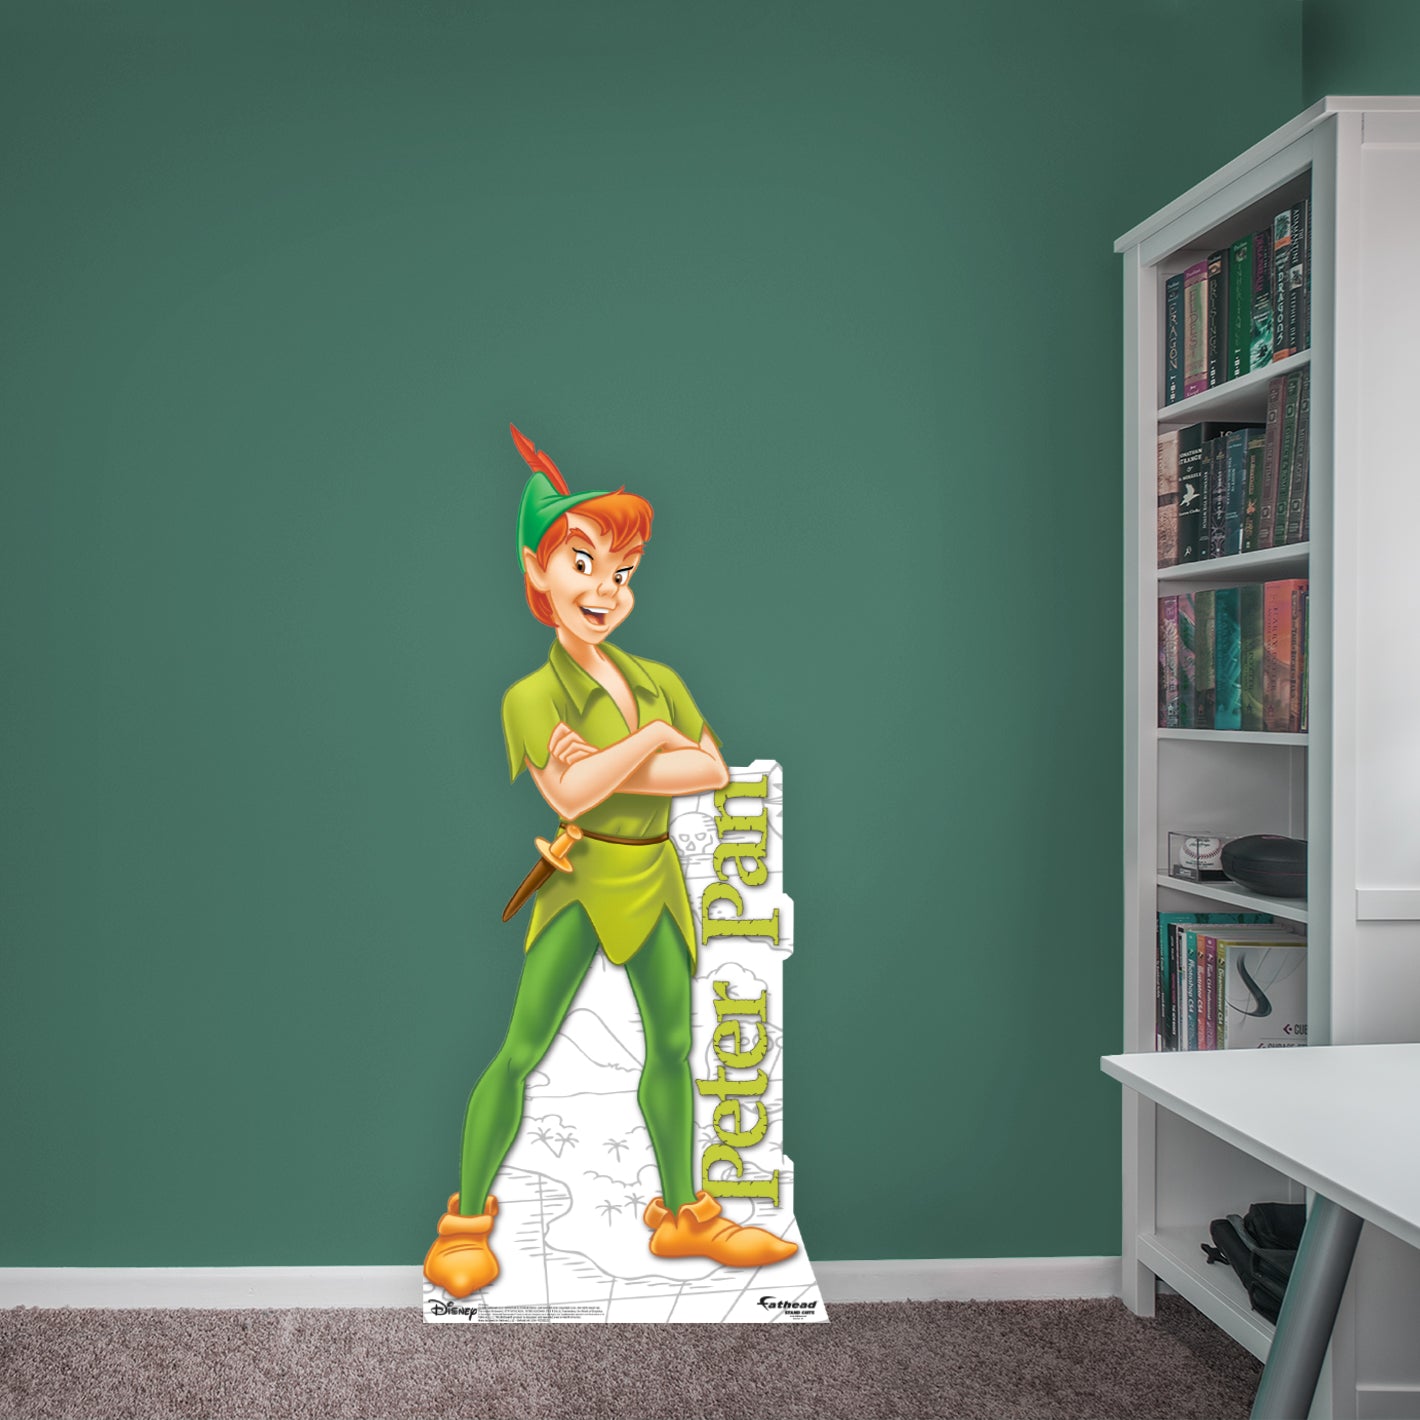 Peter Pan: Peter Pan Life-Size Foam Core Cutout - Officially Licensed Disney Stand Out